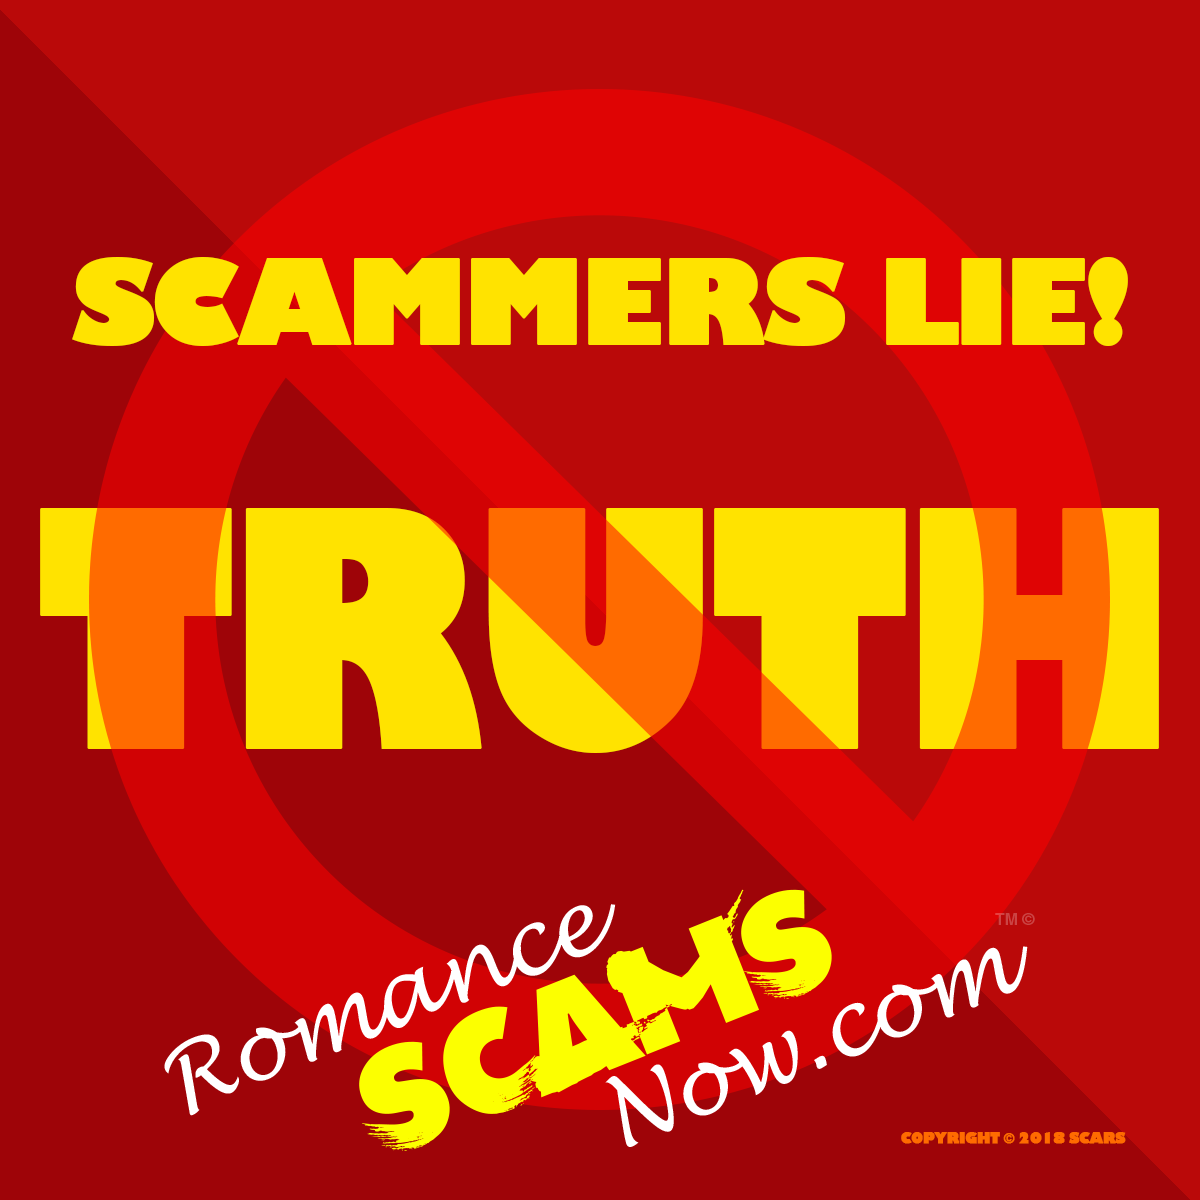 SCARS ™ / RSN™ Anti-Scam Poster 219